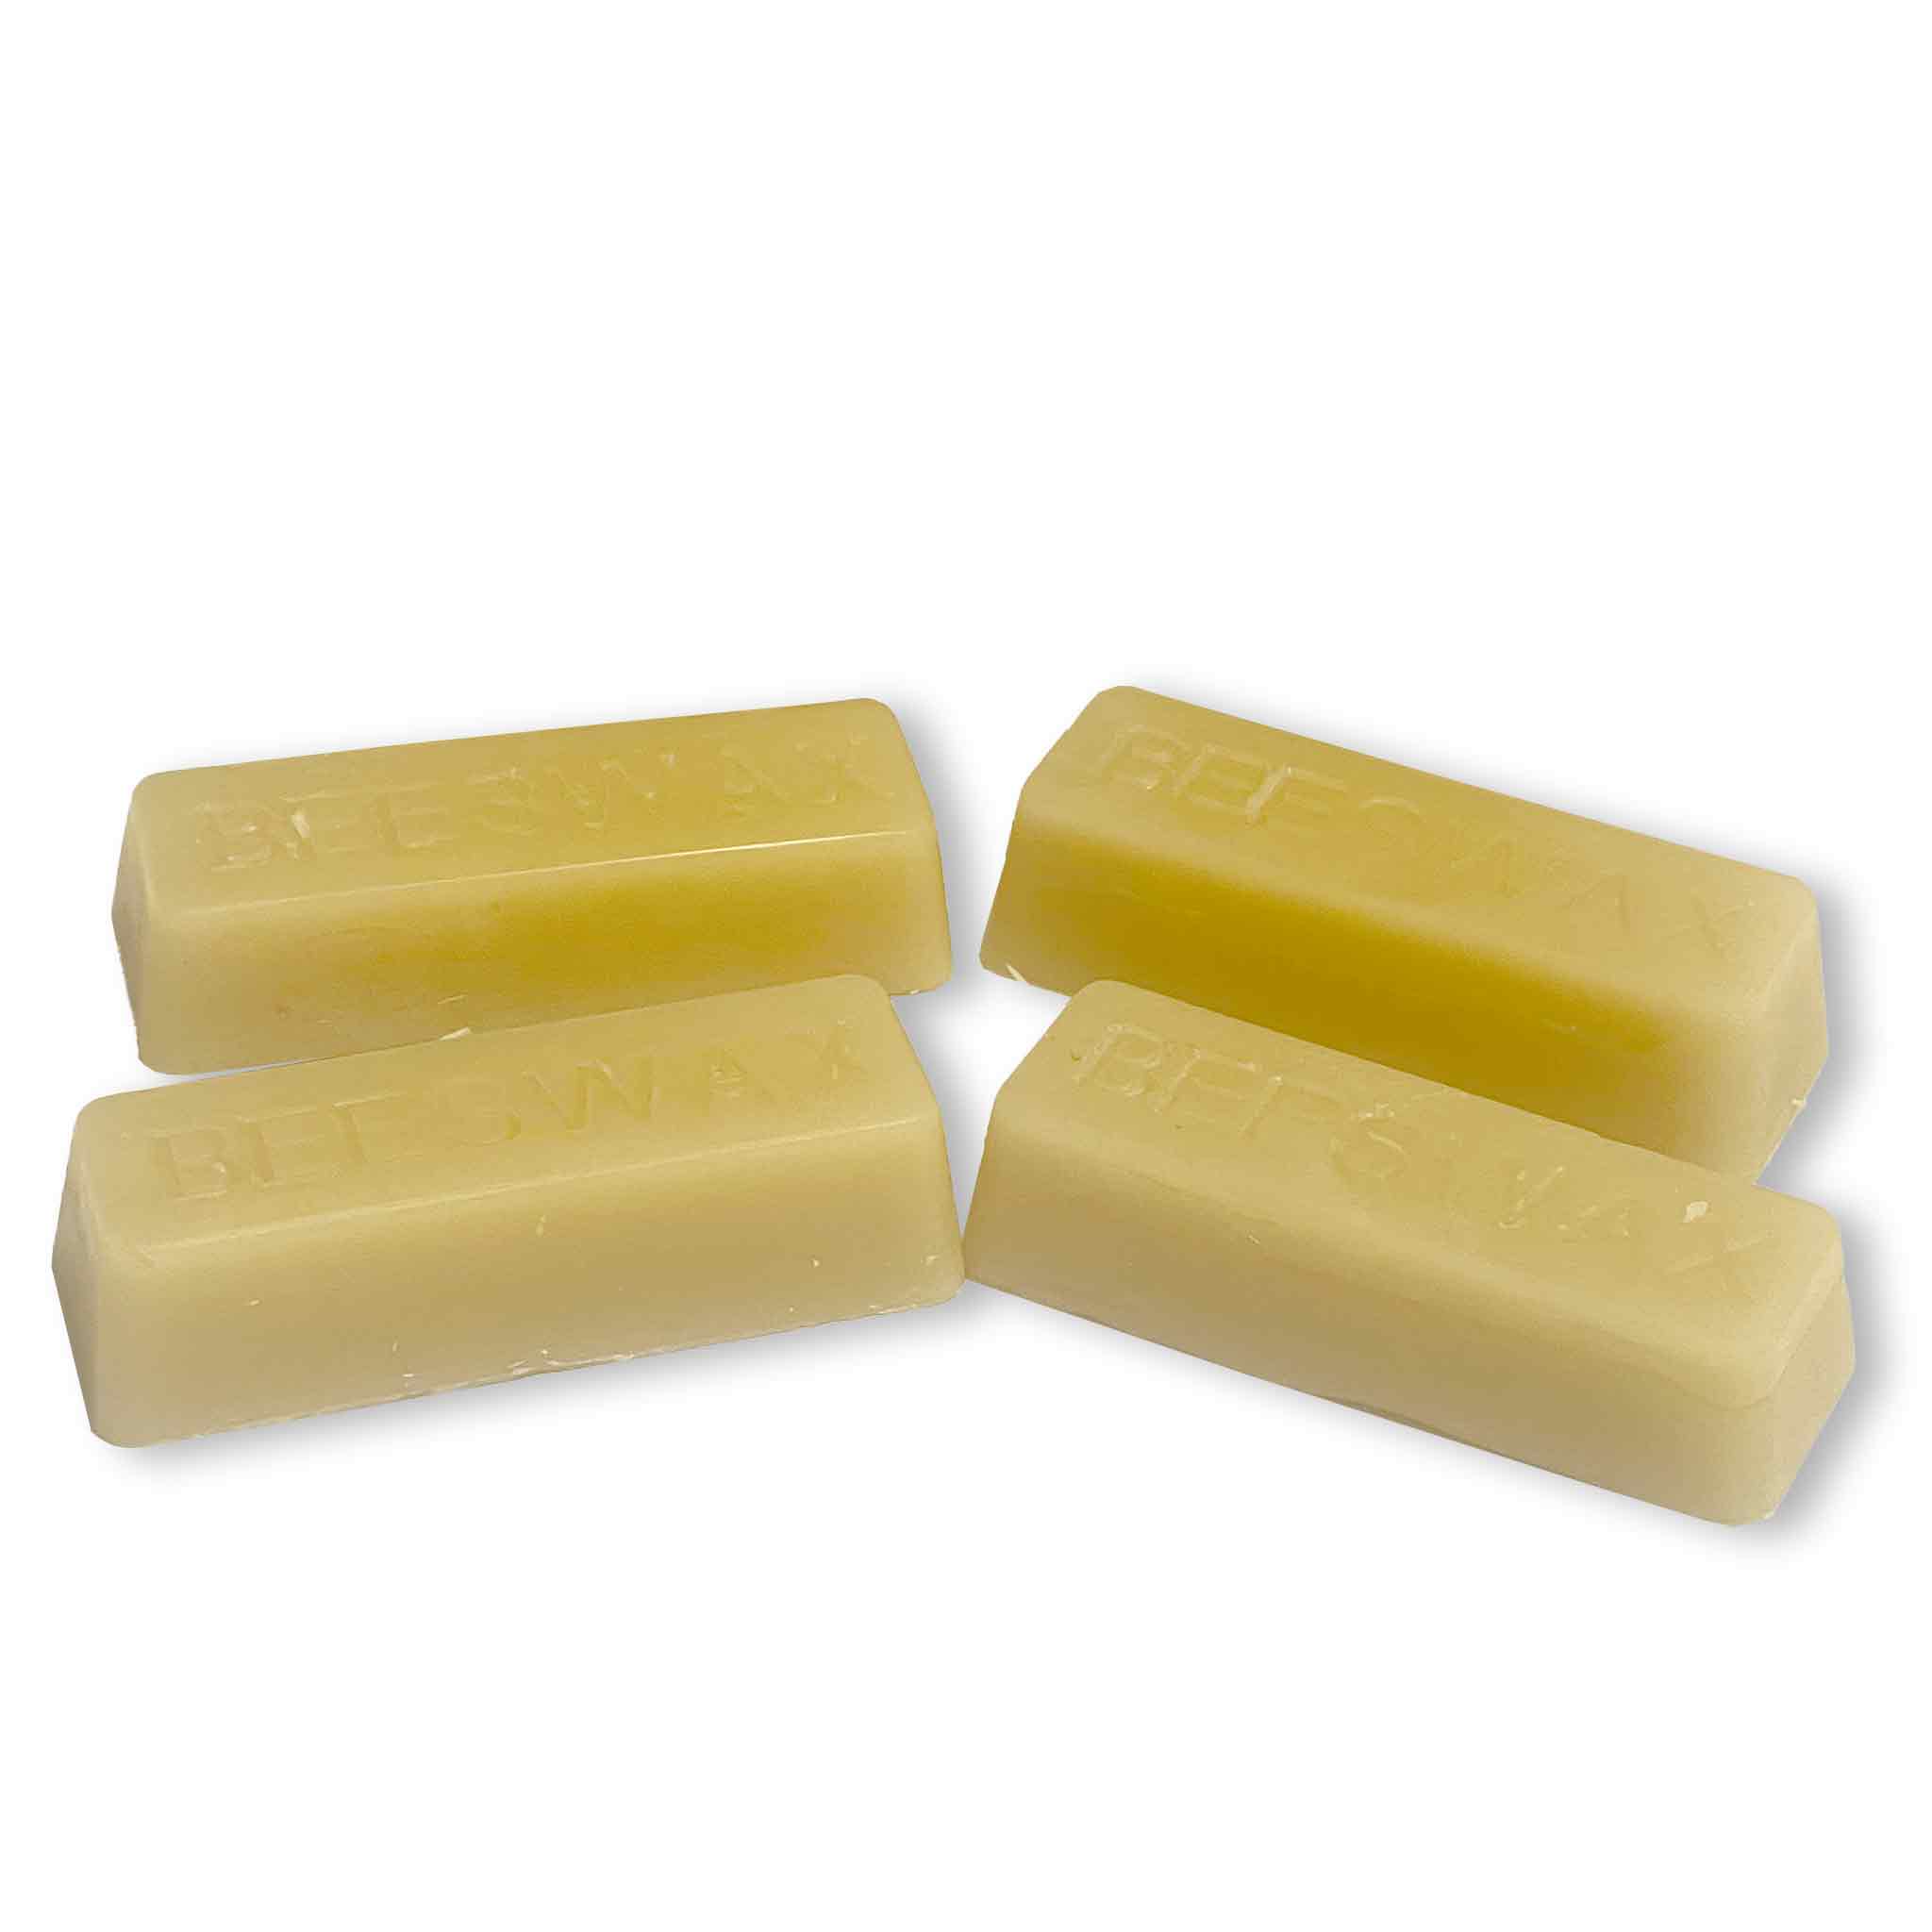 Pure 100% Australian Beewax - Small Bars (4 Pack) - Bee Products collection by Buzzbee Beekeeping Supplies